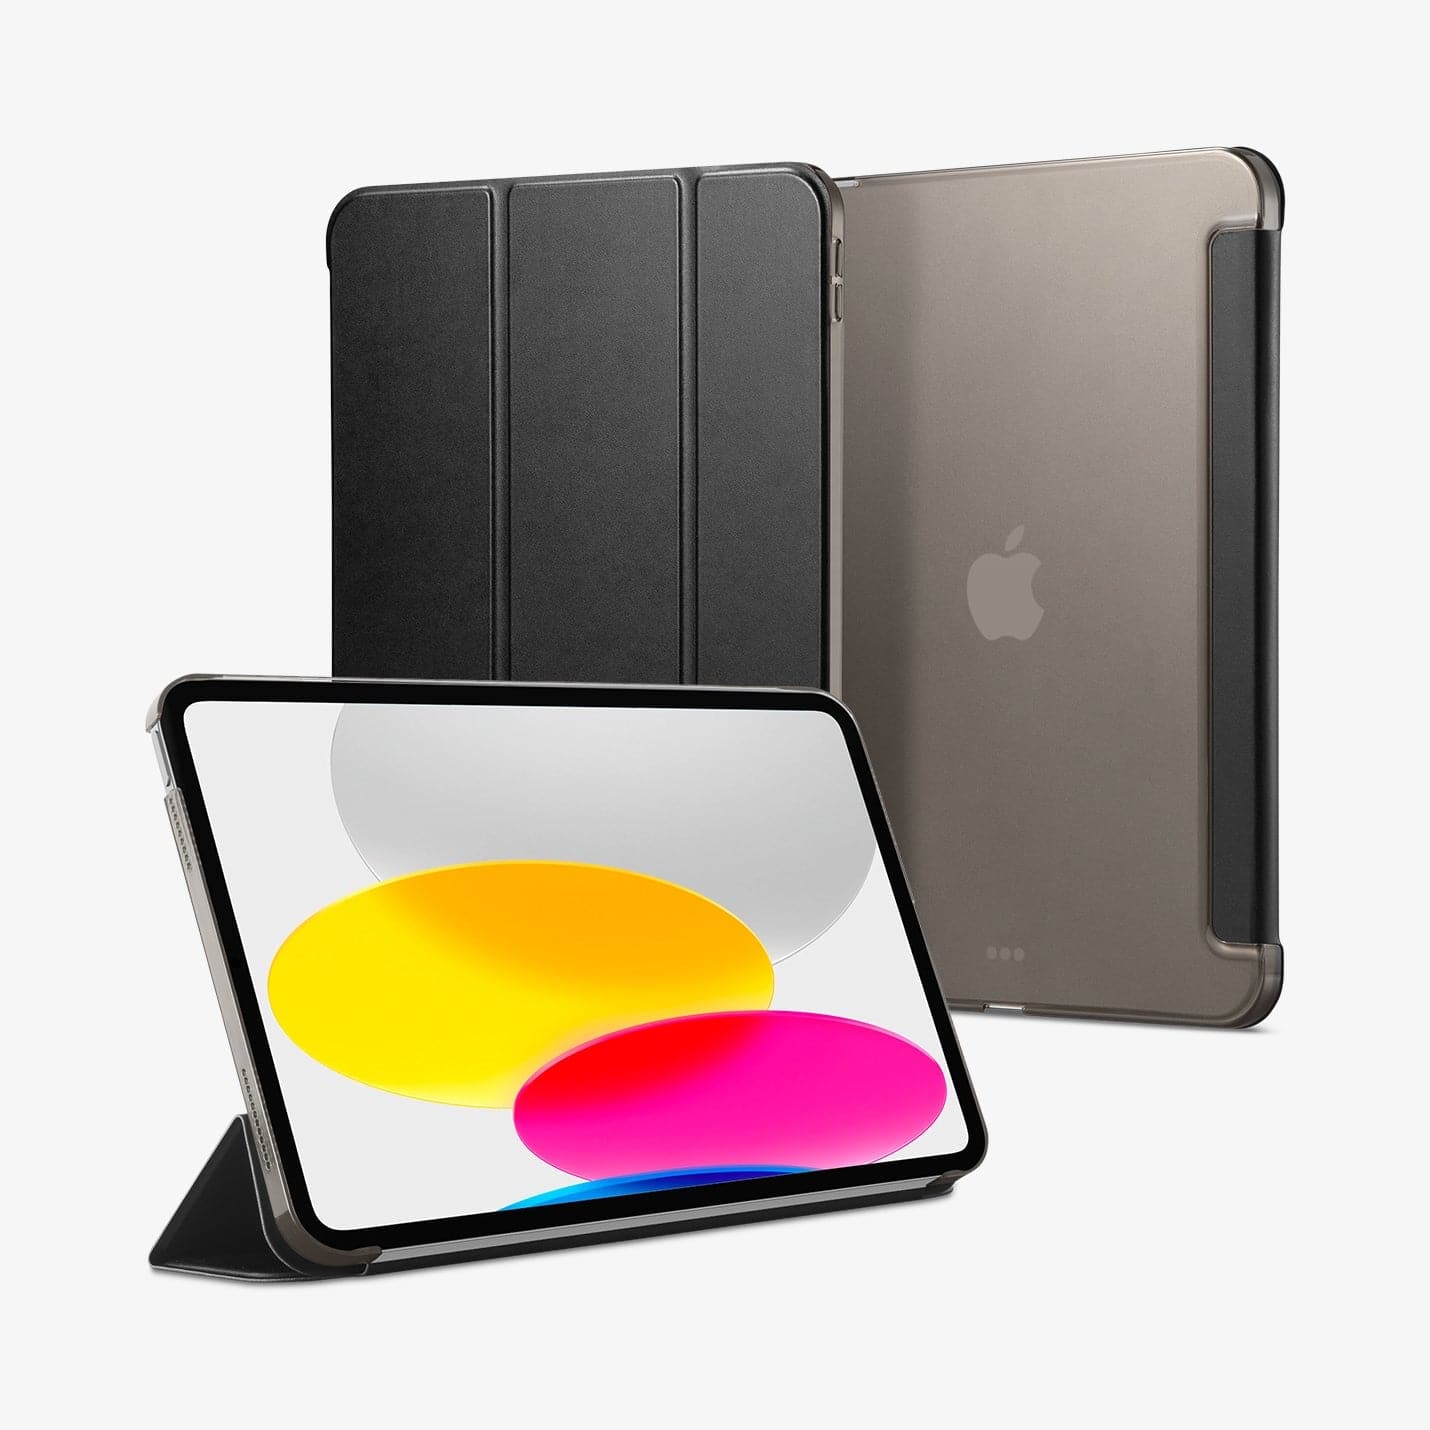 ACS05309 - iPad 10.9" Case Smart Fold in black showing the front, back and device propped up by built in kickstand